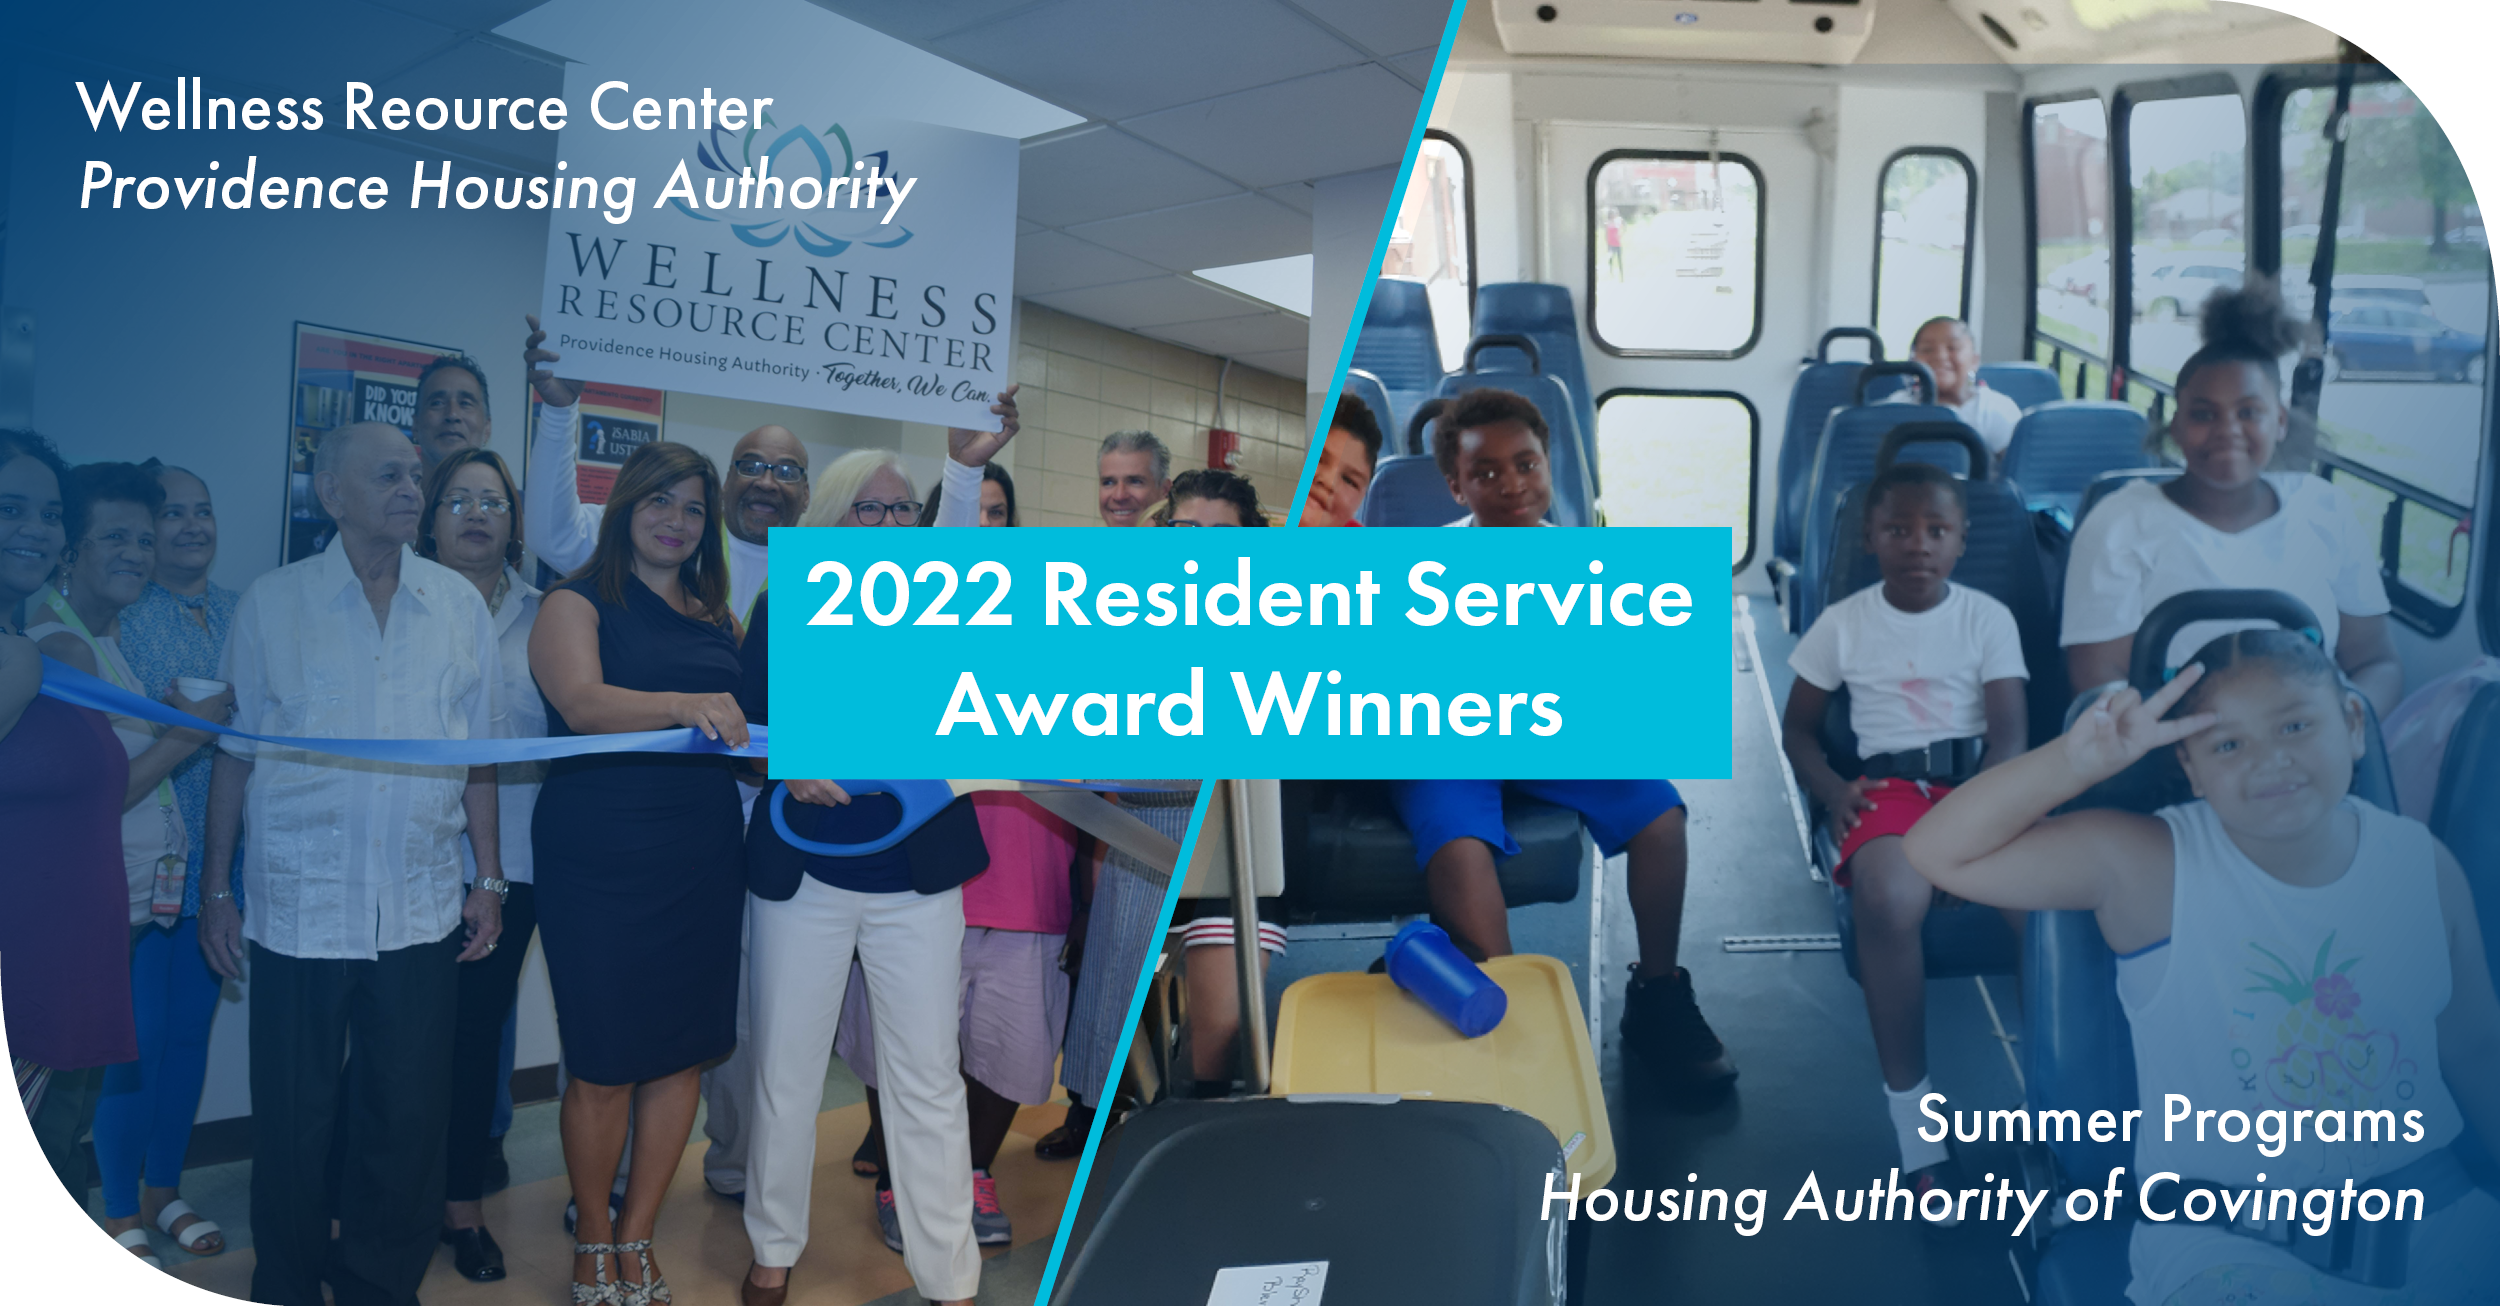 2022 Resident Service Award Winners: Wellness Resource Center/Providence Housing Authority (image of a ribbon-cutting inside a building, with the Wellness Resource Center logo displayed on a sign) and Summer Programs/Housing Authority of Covington (image of children smiling and posing on a bus)